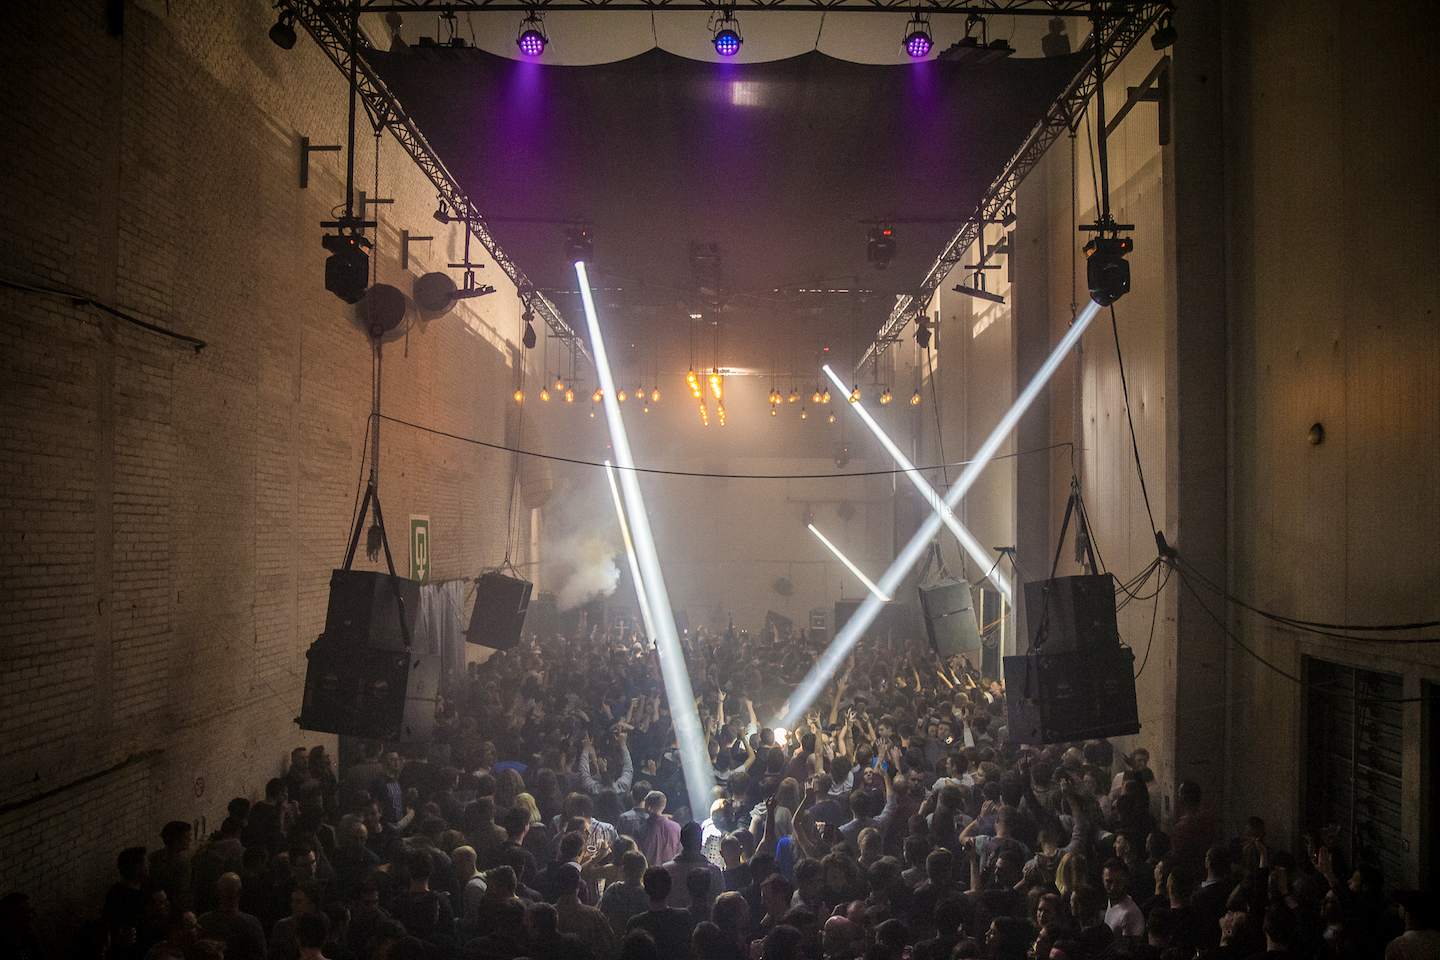 R&S takes over Kompass with Maceo Plex and label founder Renaat Vandepapeliere image